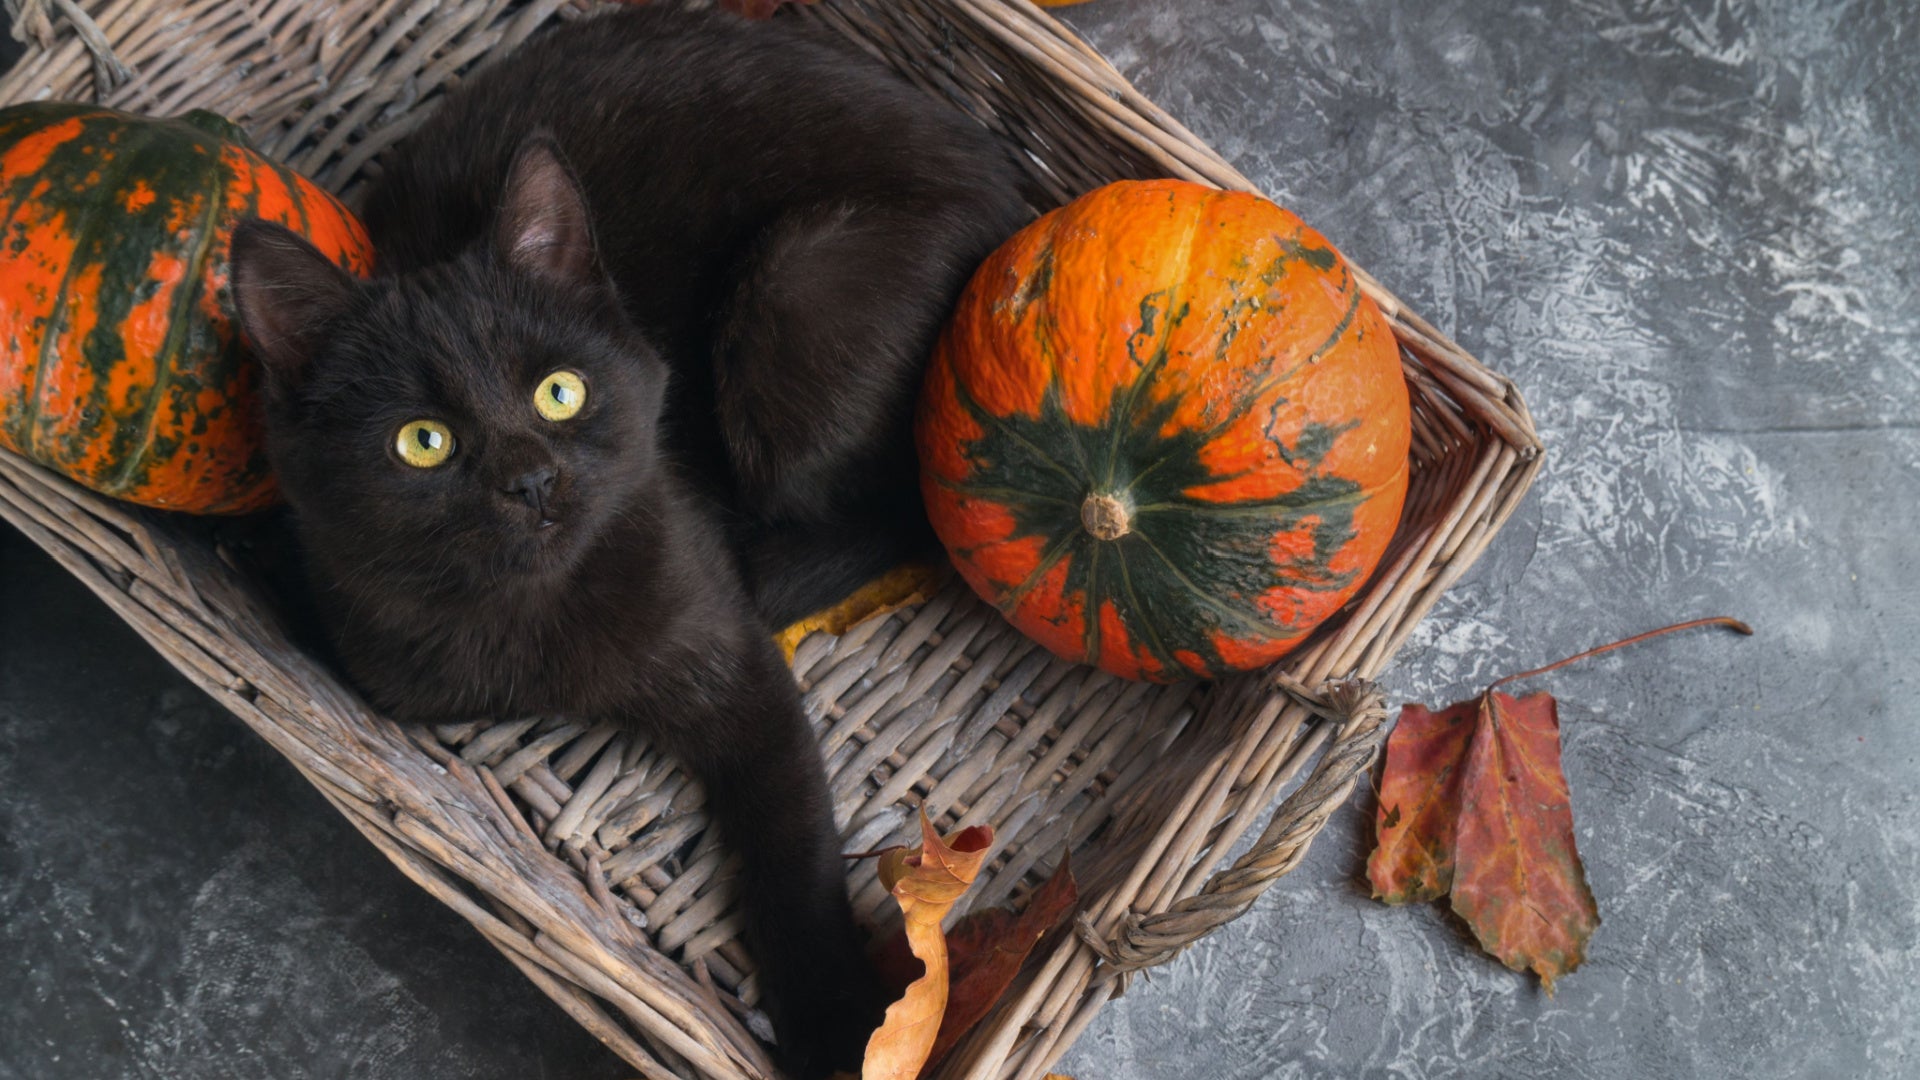 Why Black Cats Are Associated With Halloween and Bad Luck